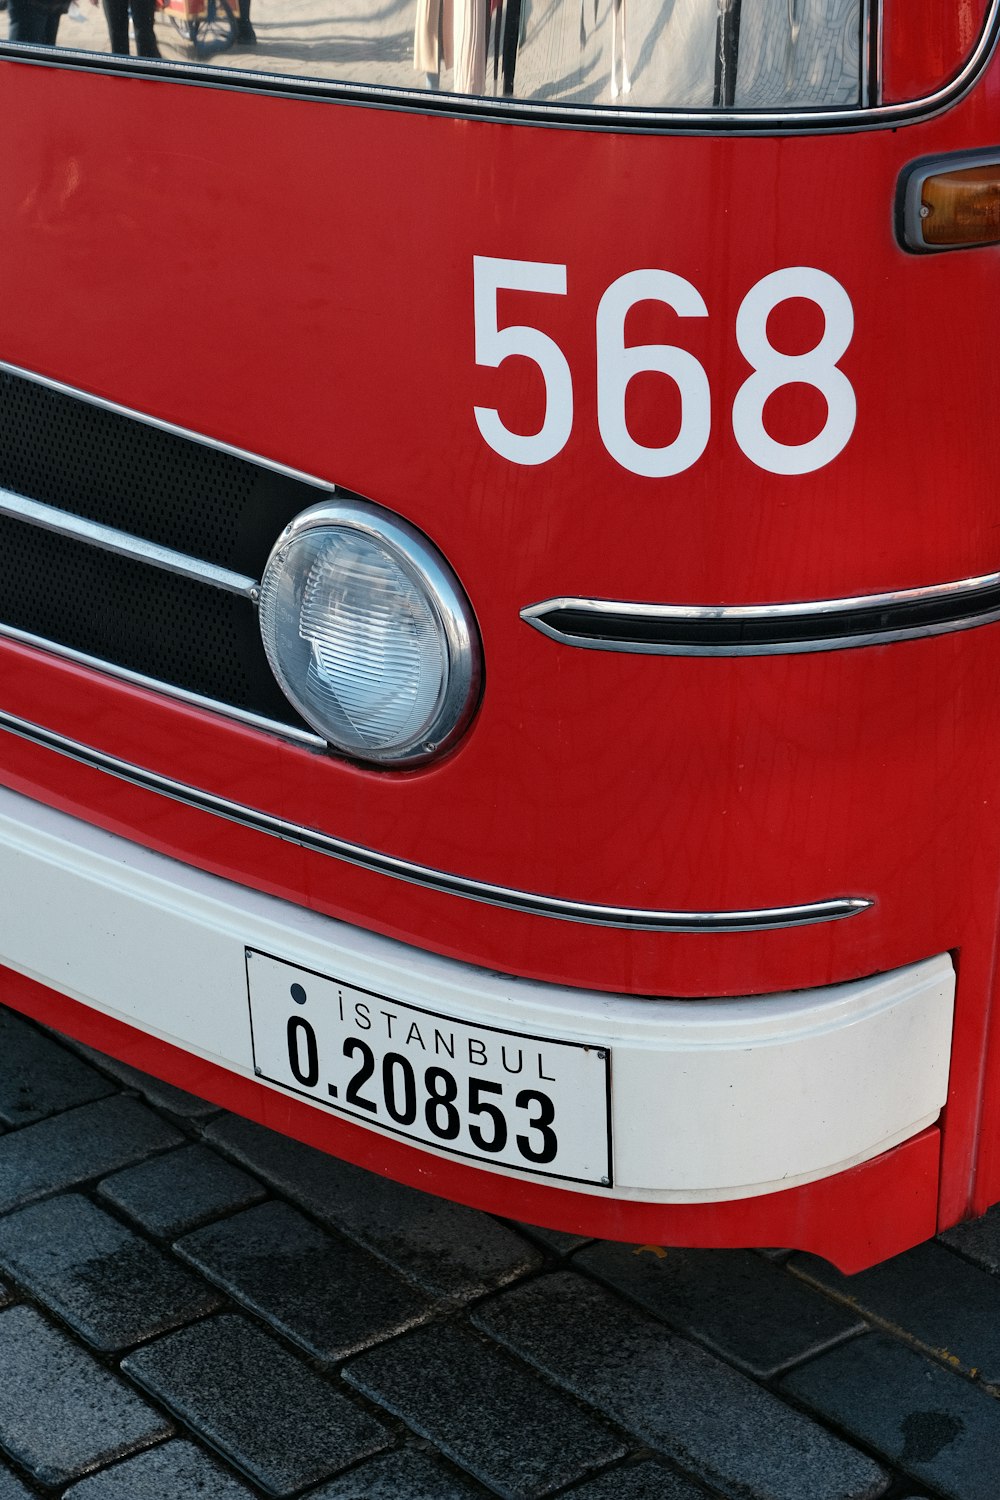 a close up of the front of a red bus